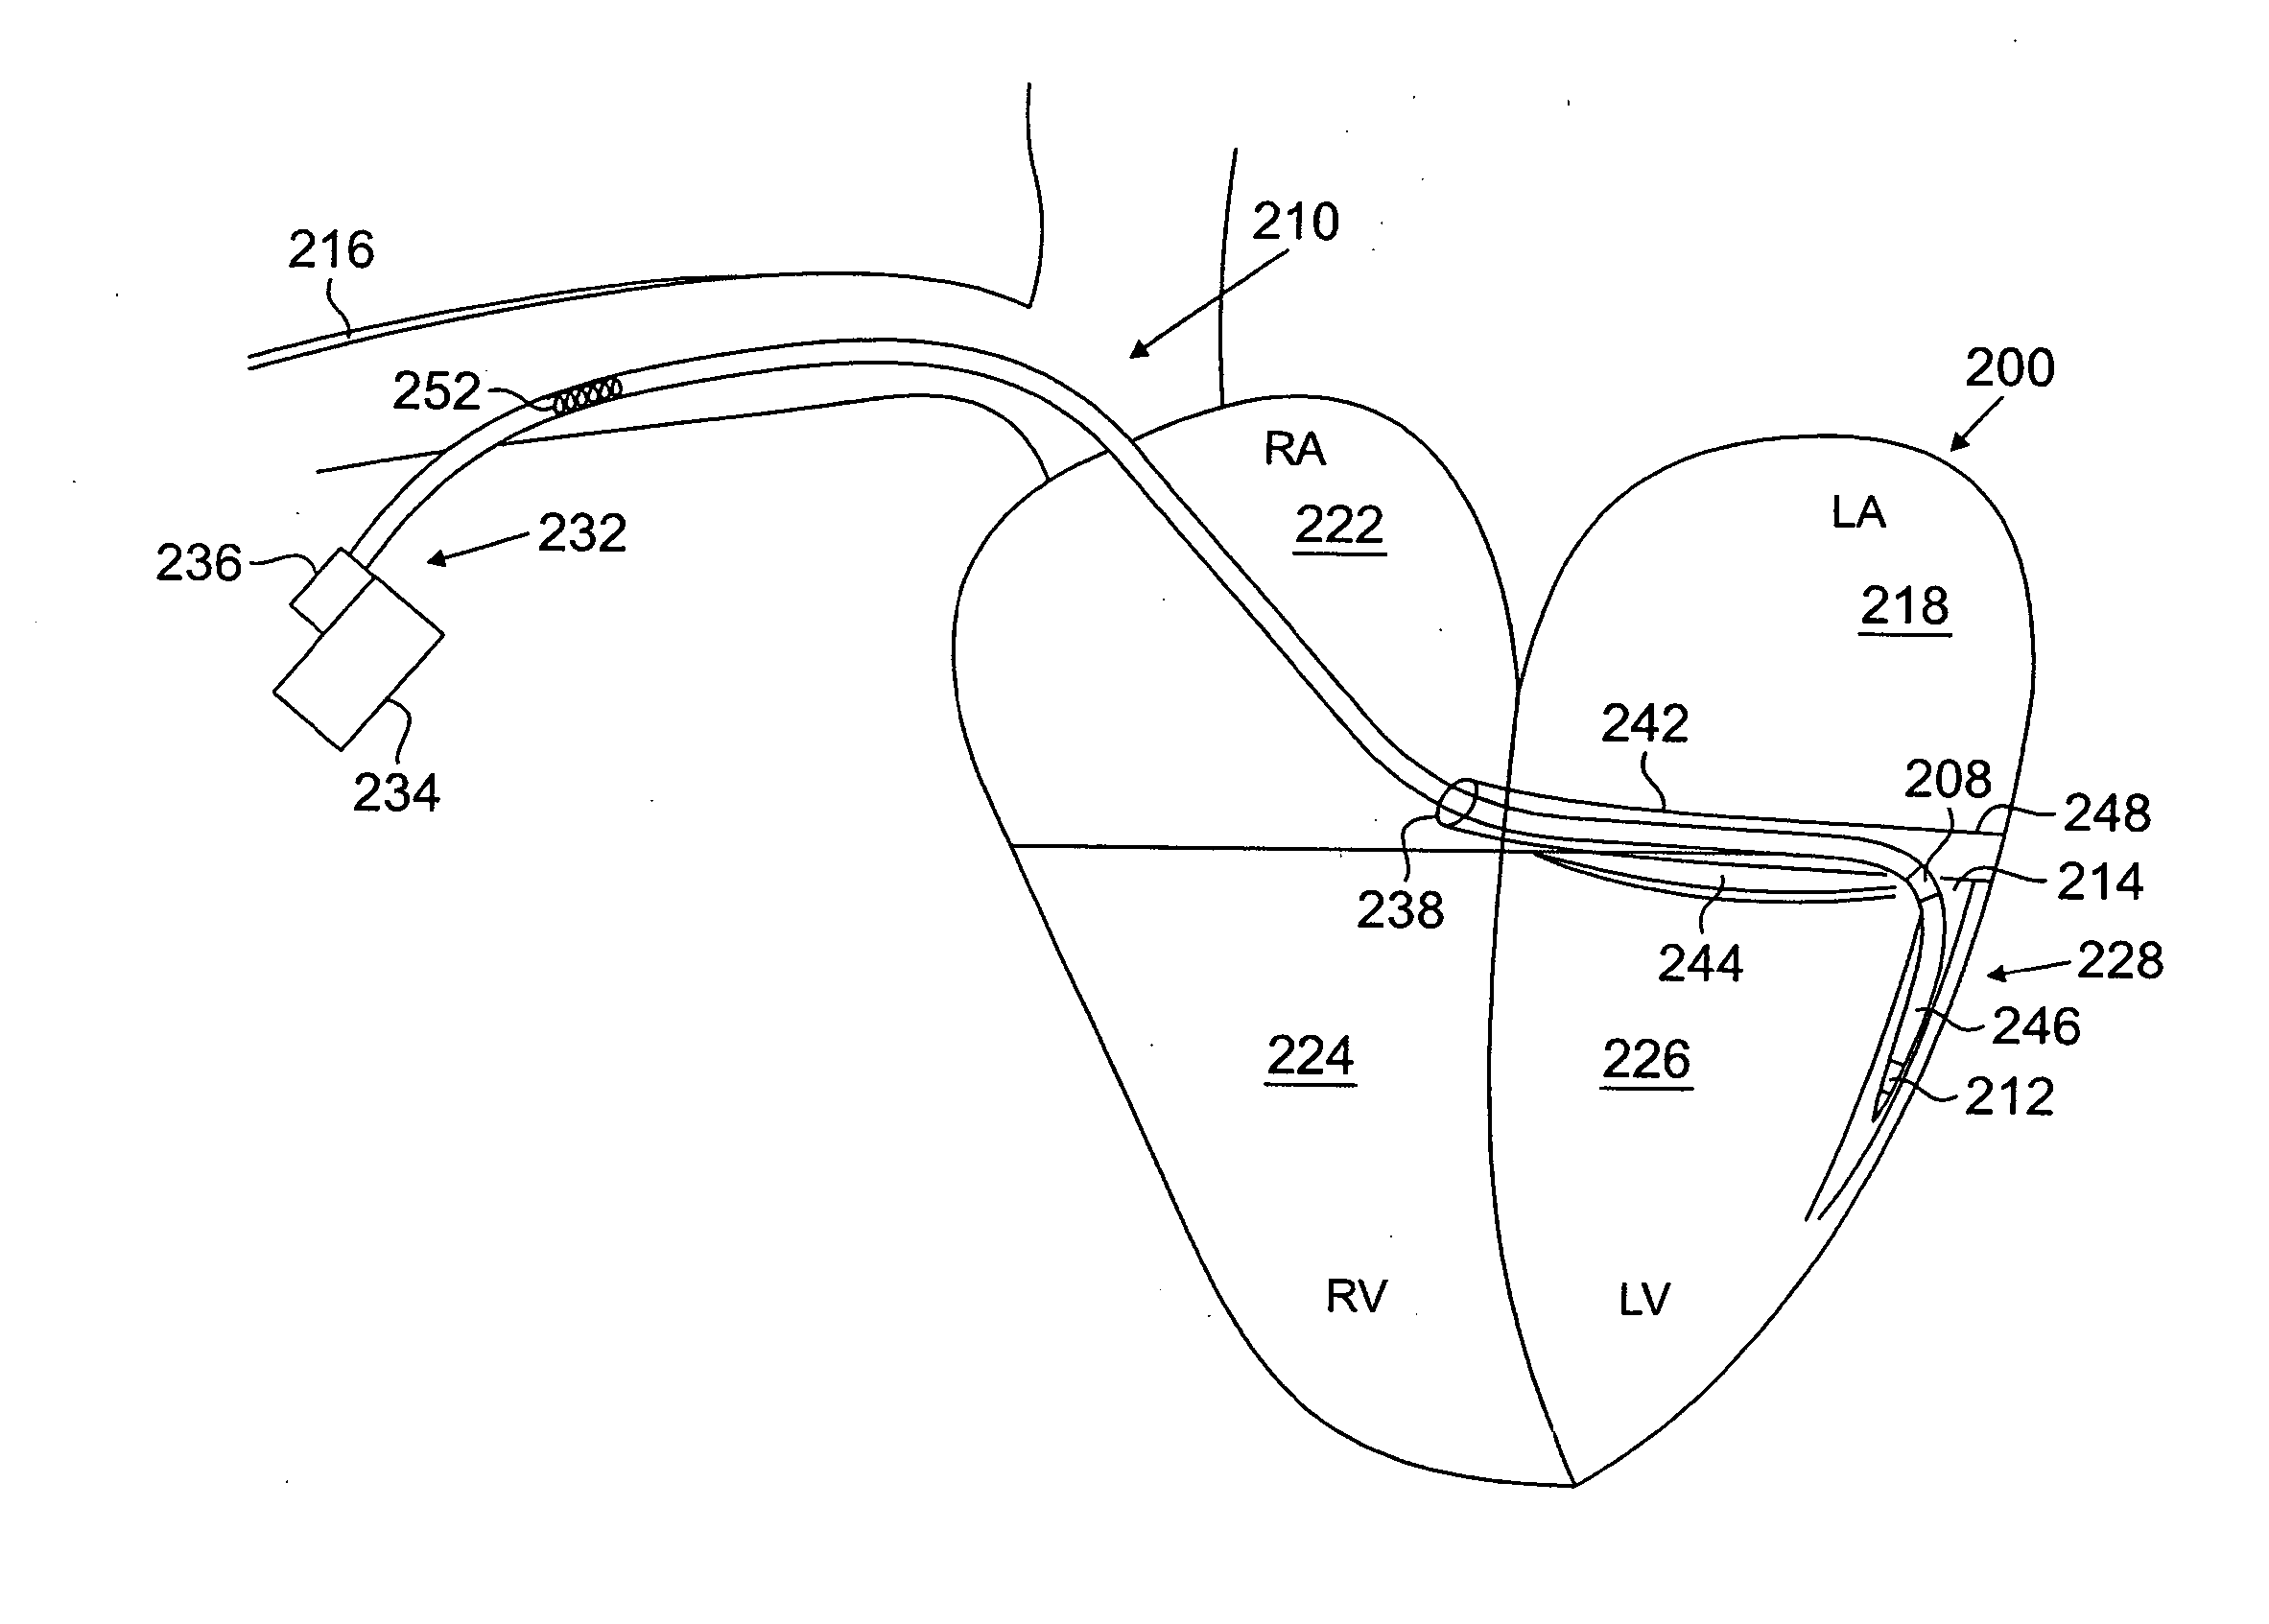 Devices and methods for accelerometer-based characterization of cardiac synchrony and dyssynchrony